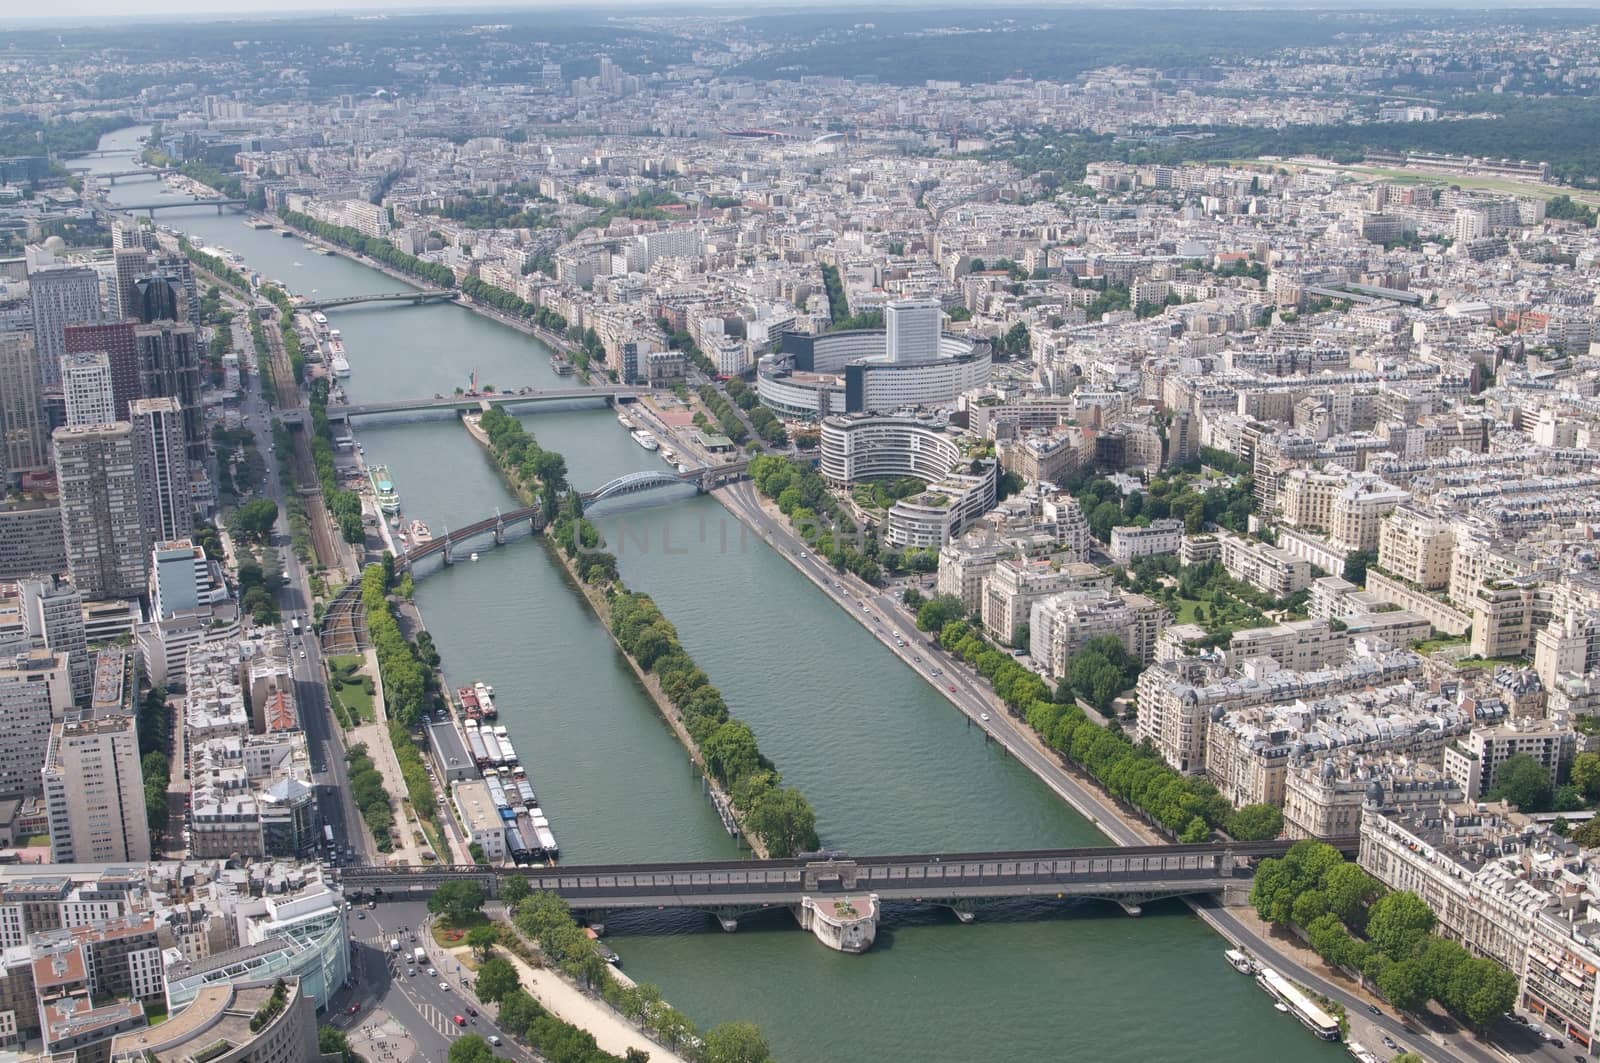 The view from the top of the Eifel tower